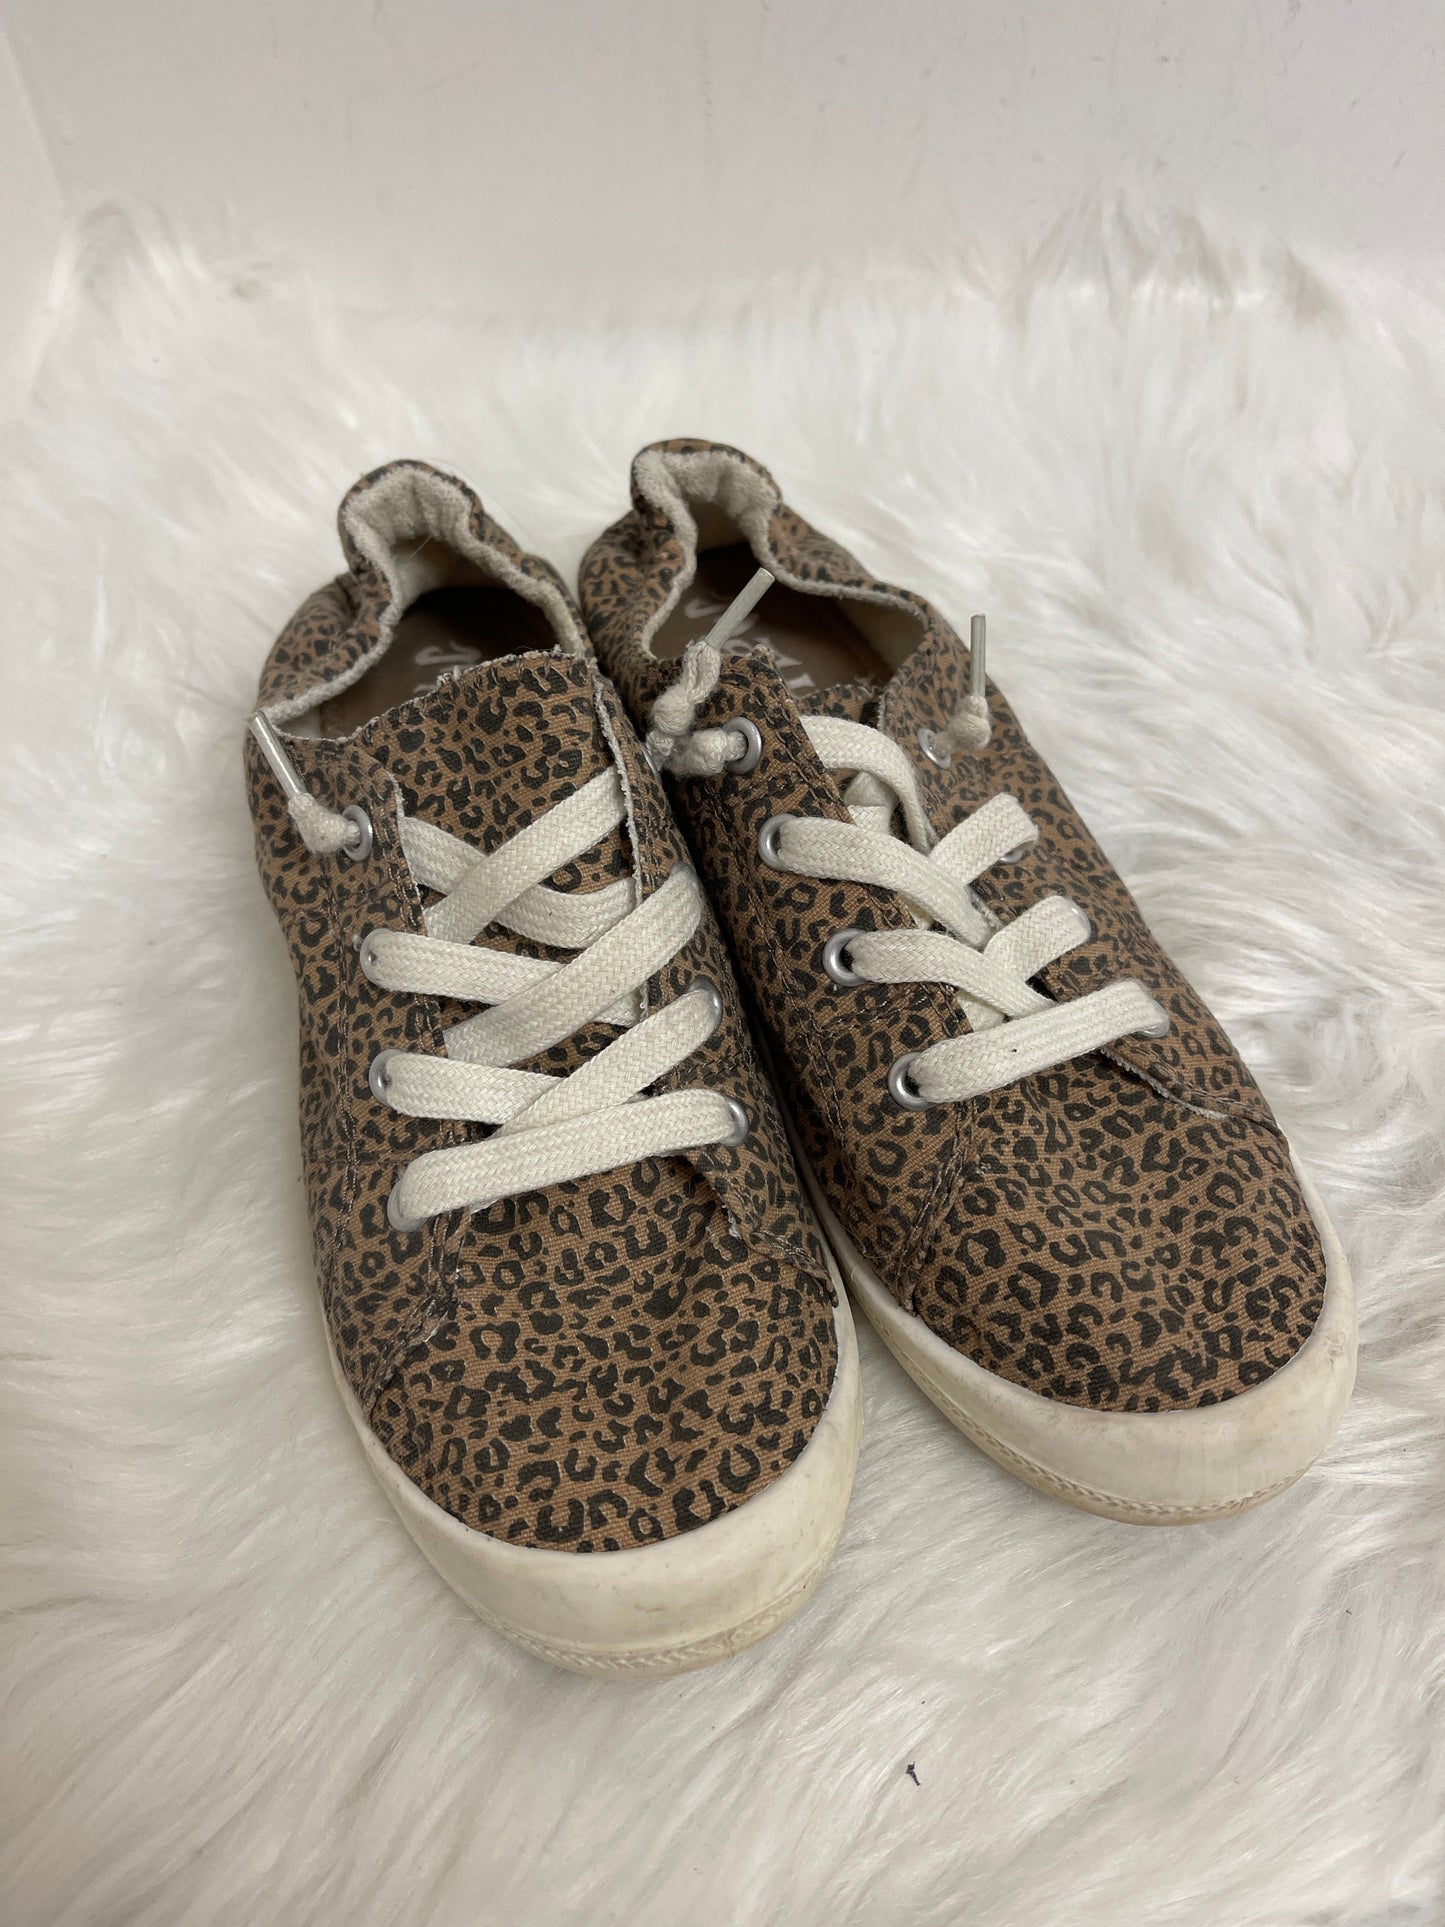 Animal Print Shoes Sneakers Mad Love, Size 7